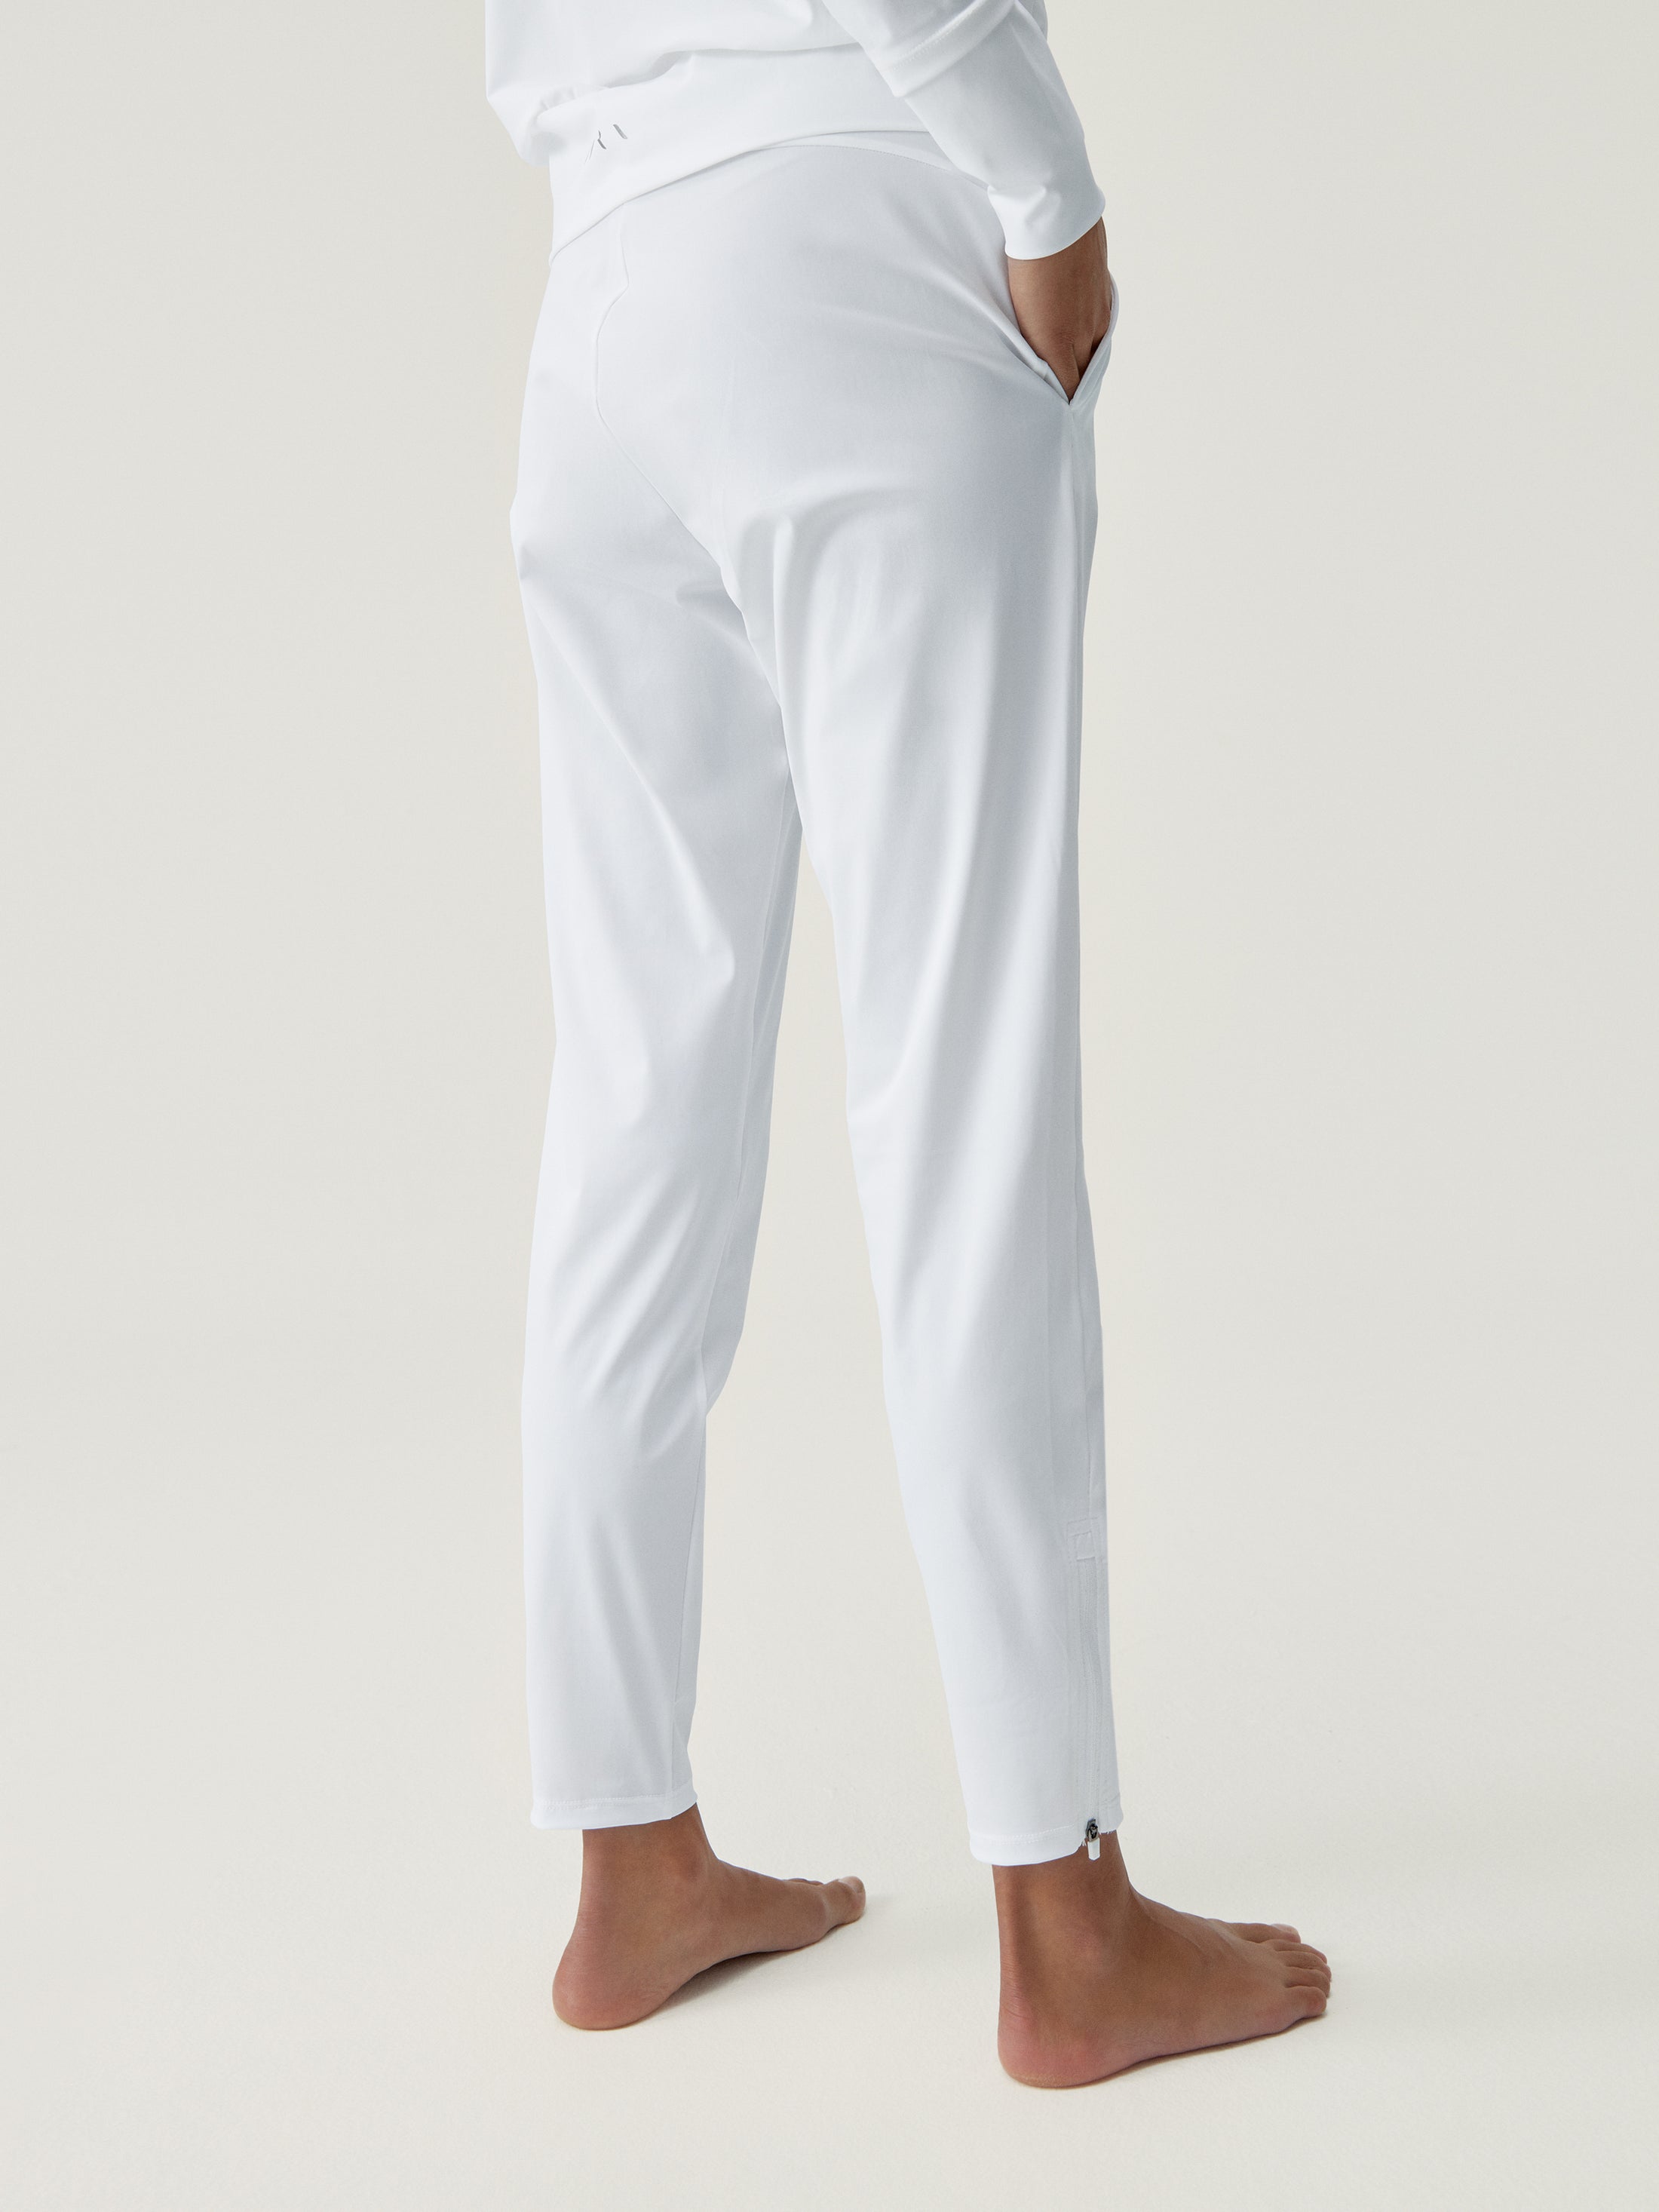 Airla Joggers in White